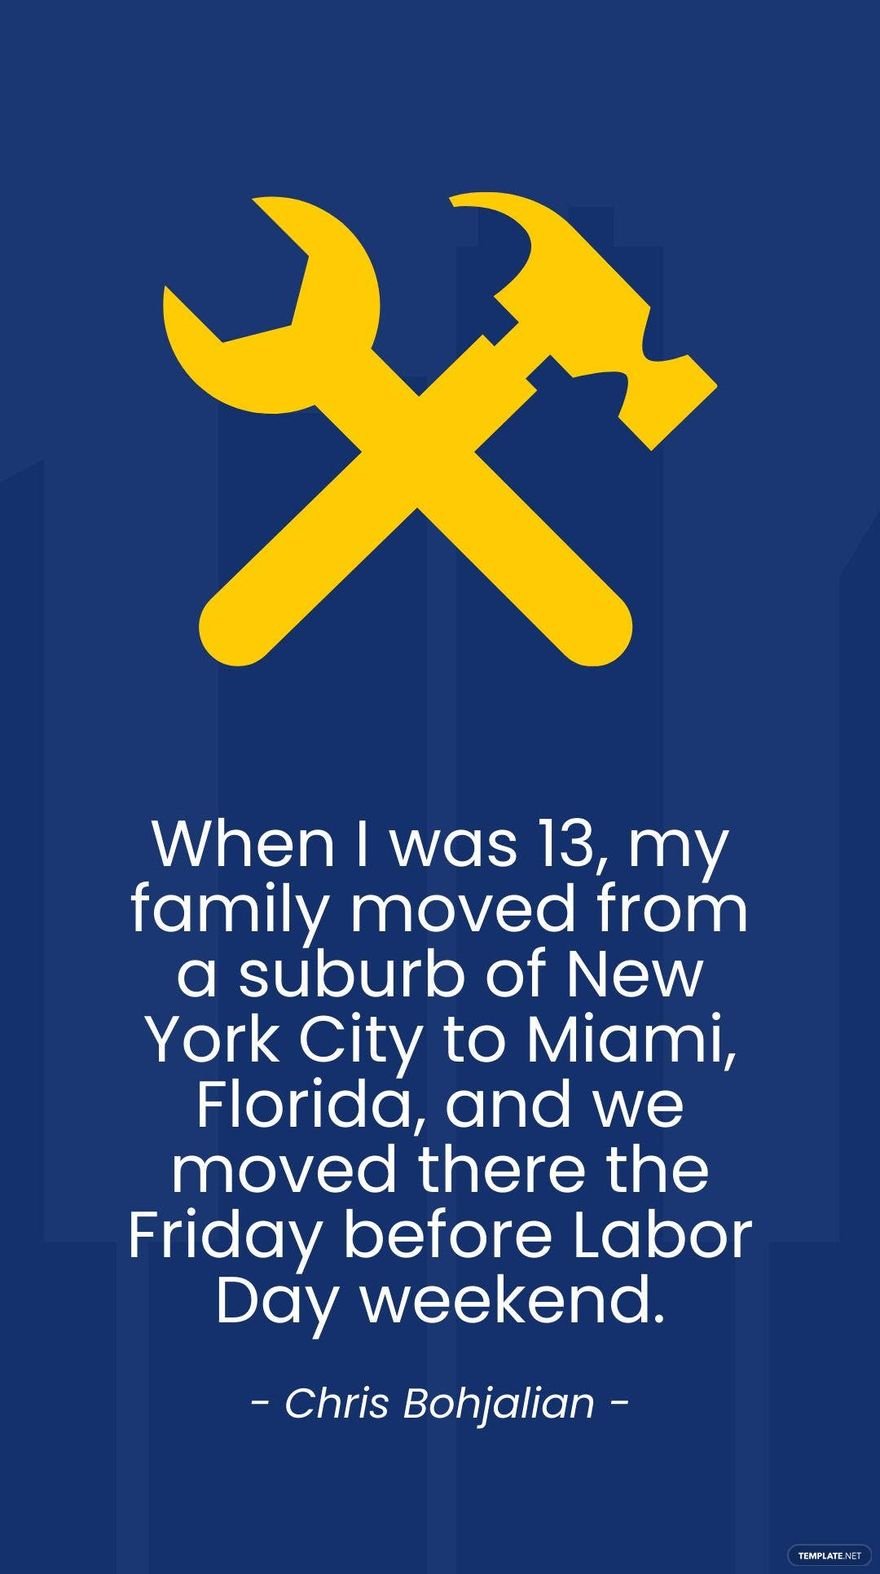 Chris Bohjalian - When I was 13, my family moved from a suburb of New York City to Miami, Florida, and we moved there the Friday before Labor Day weekend.